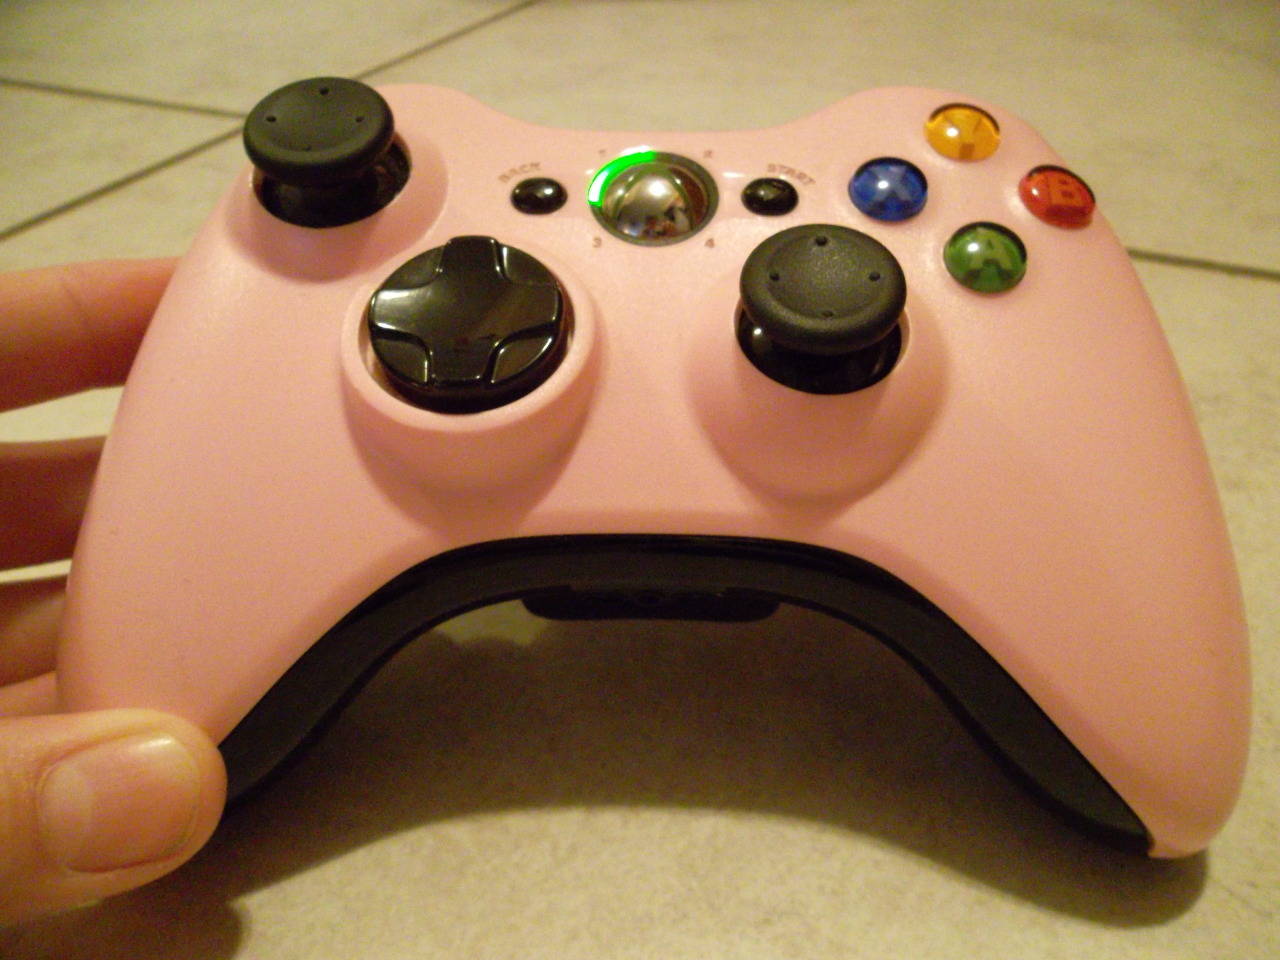 Amber&rsquo;s custom 360 controller, featuring the discontinued pink faceplate